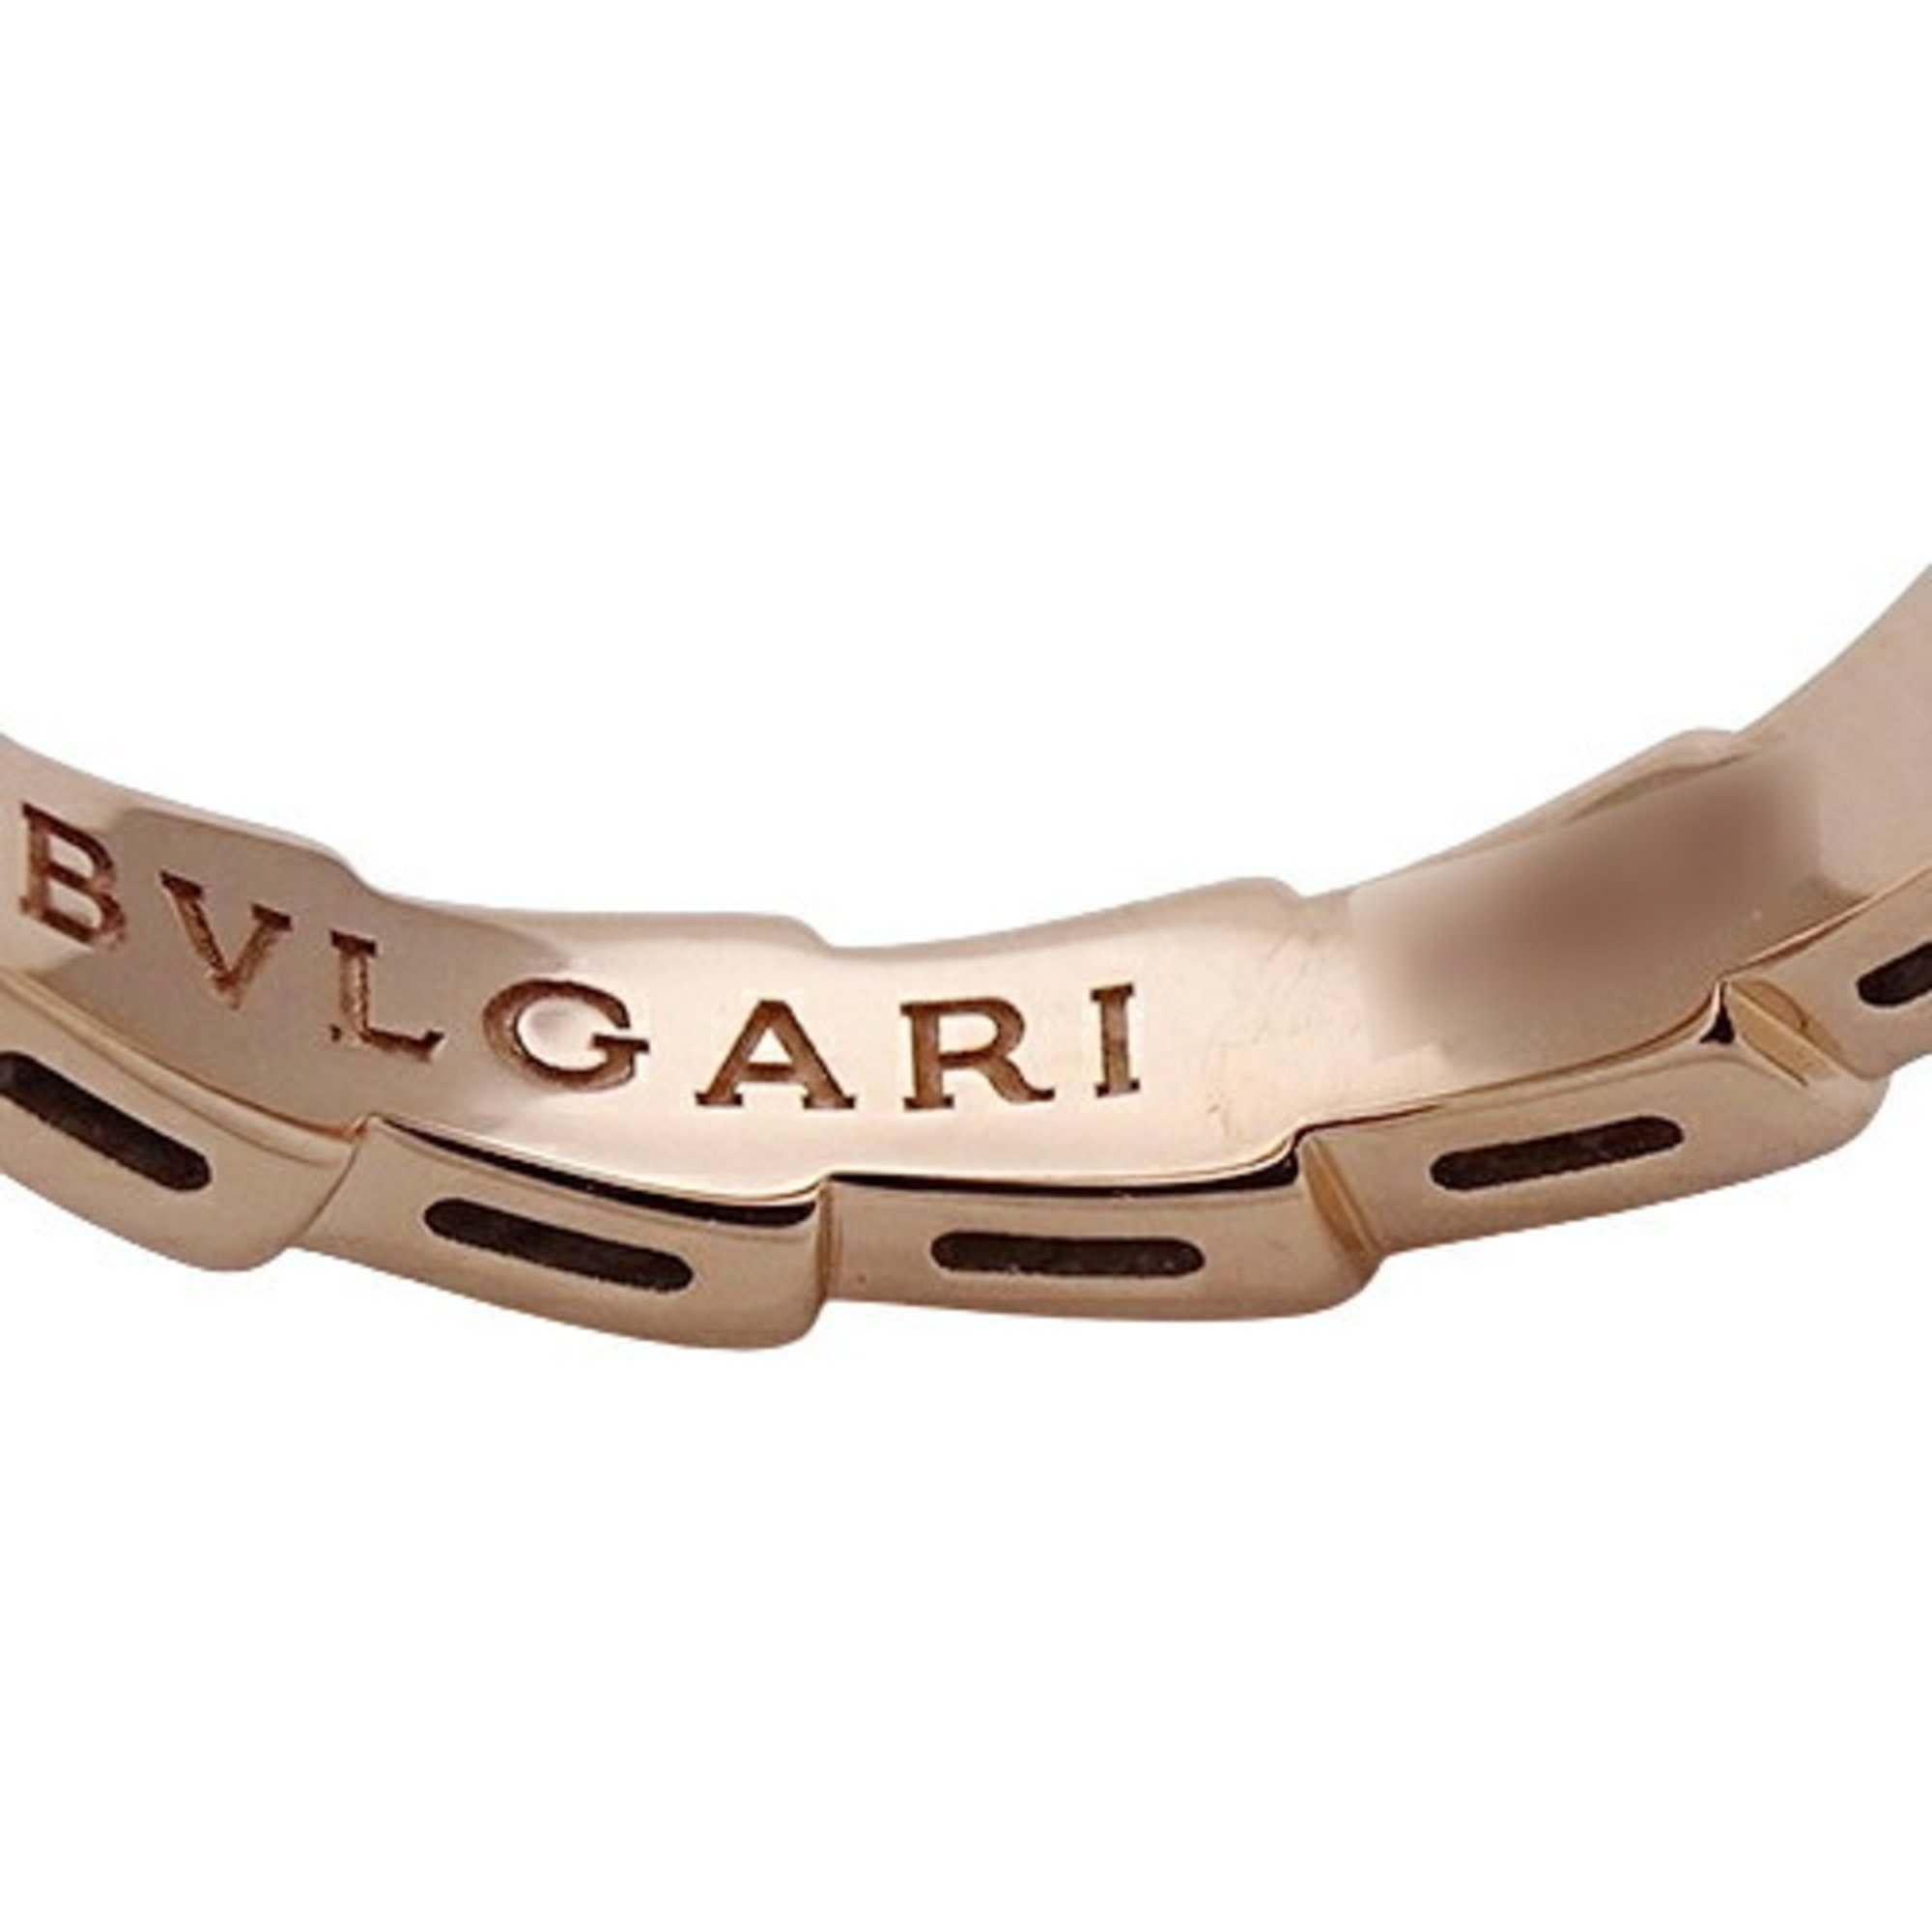 BVLGARI Ring for Women and Men, 750PG Serpenti Viper Pink Gold #58, Size 17.5, Polished